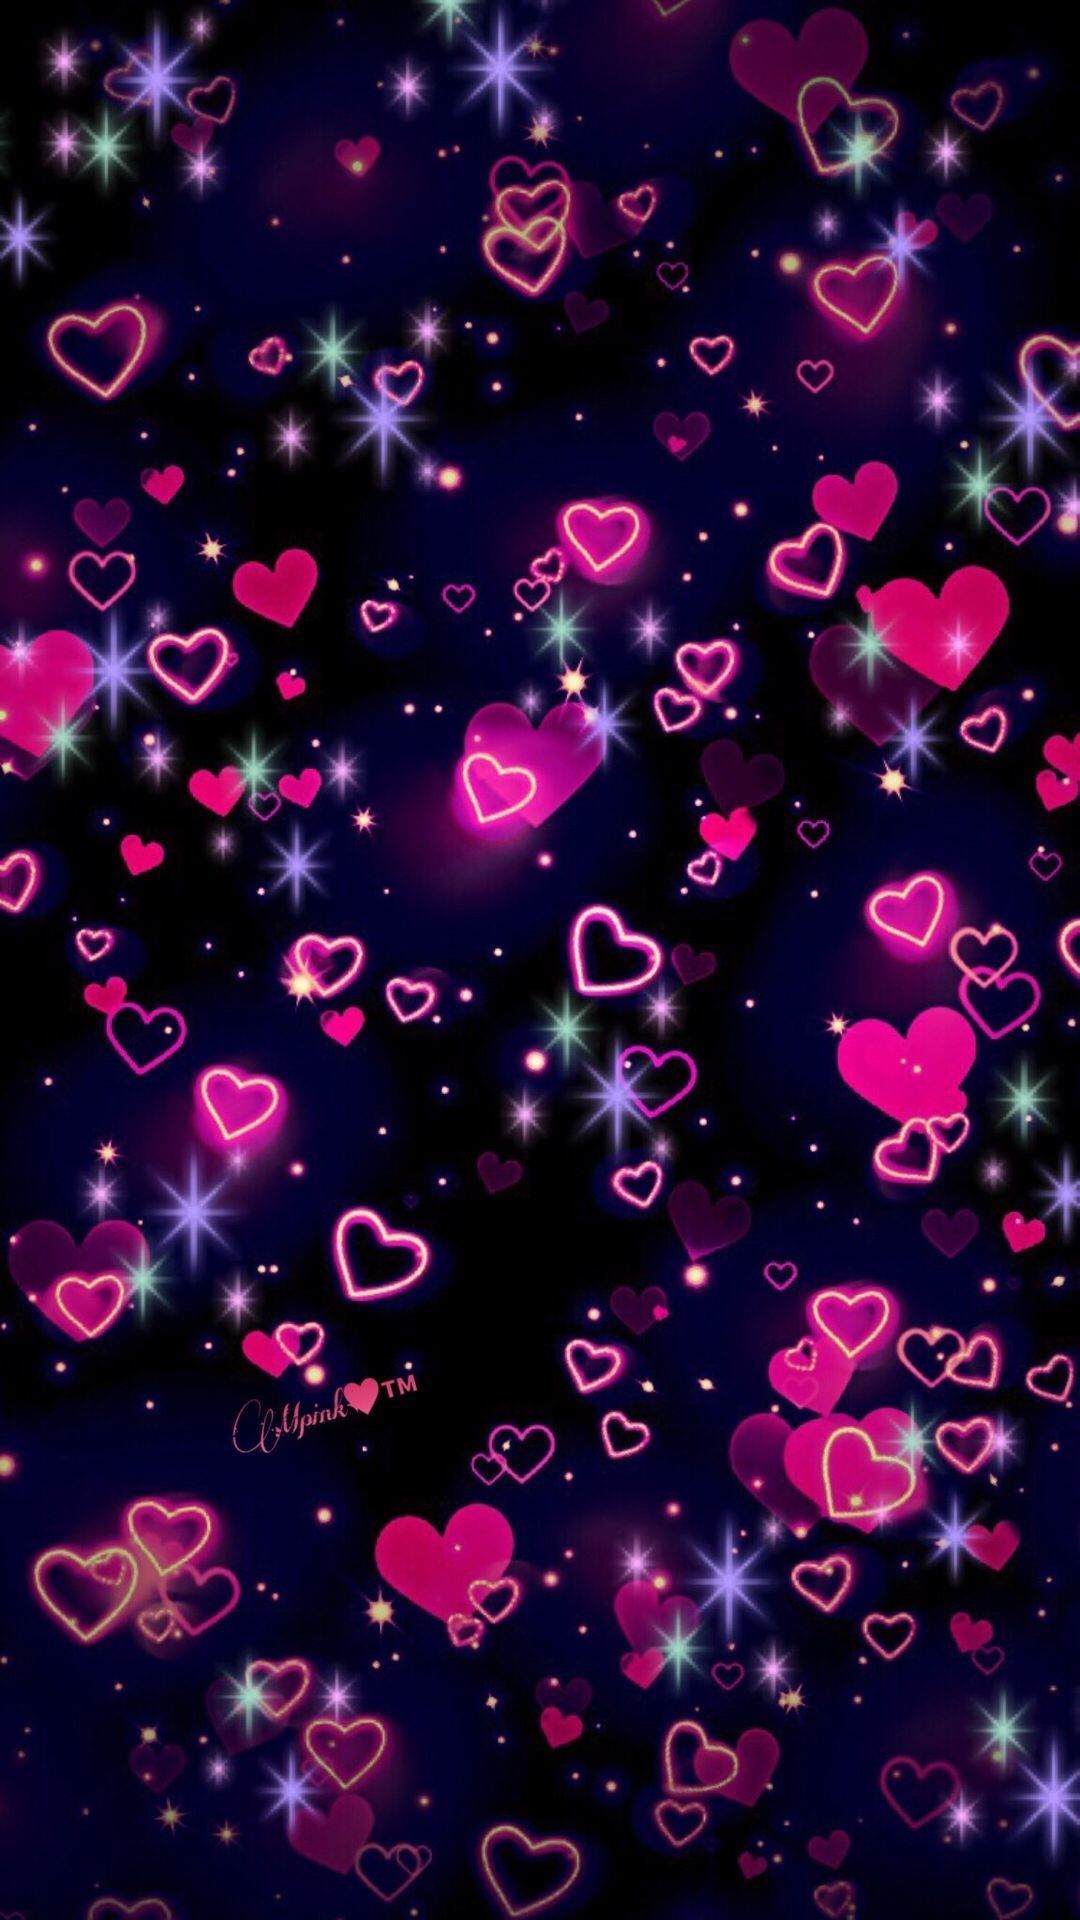 Pink Hearts wallpaper by CaliPink - Heart